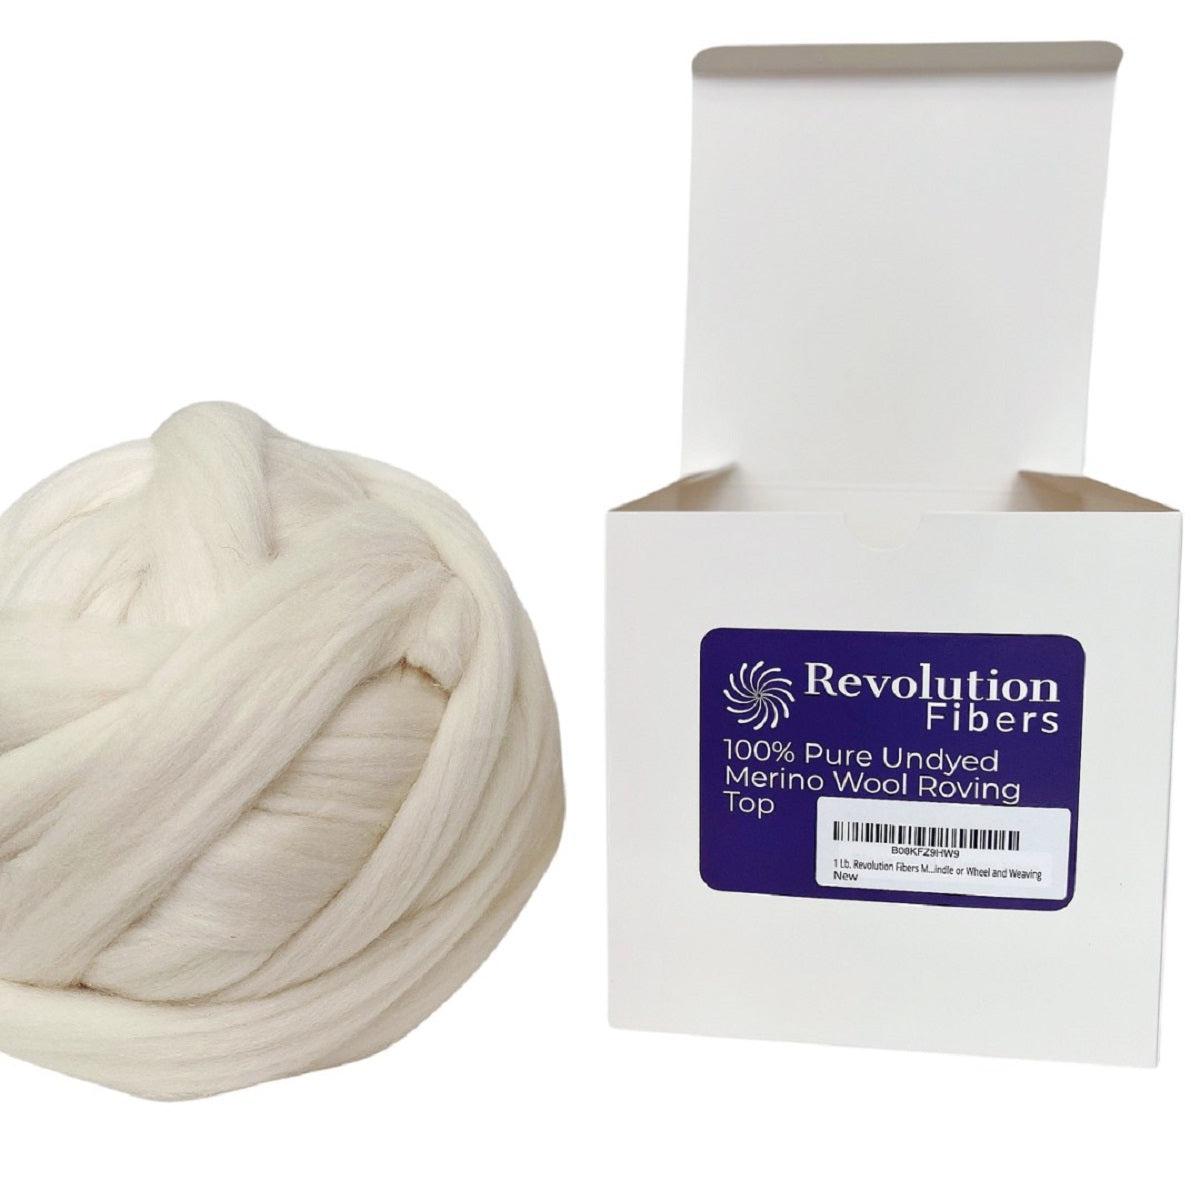 Merino Wool Roving Top (1 lb / 16 oz) | 25 Microns, Natural Undyed, Clean and Combed Wool-Wool Roving-Revolution Fibers-Revolution Fibers